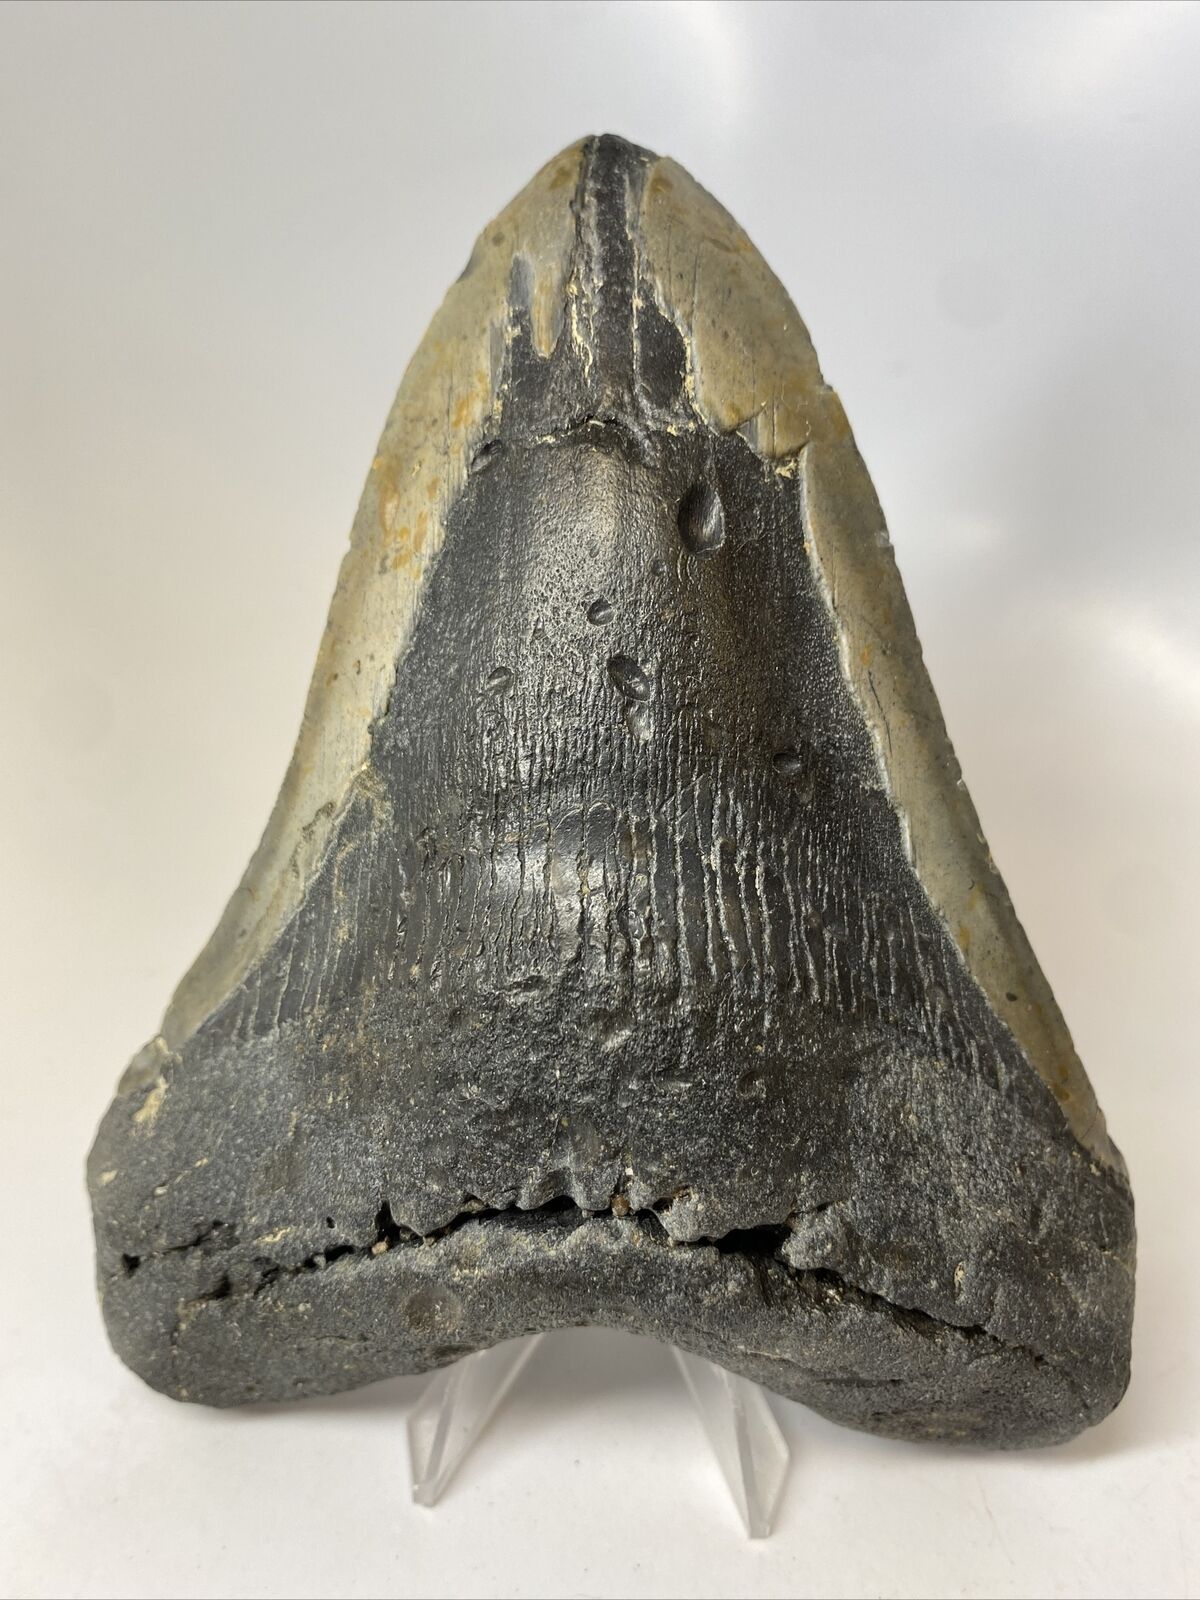 Megalodon Shark Tooth 6.05” Giant - Authentic Fossil - Natural 14014